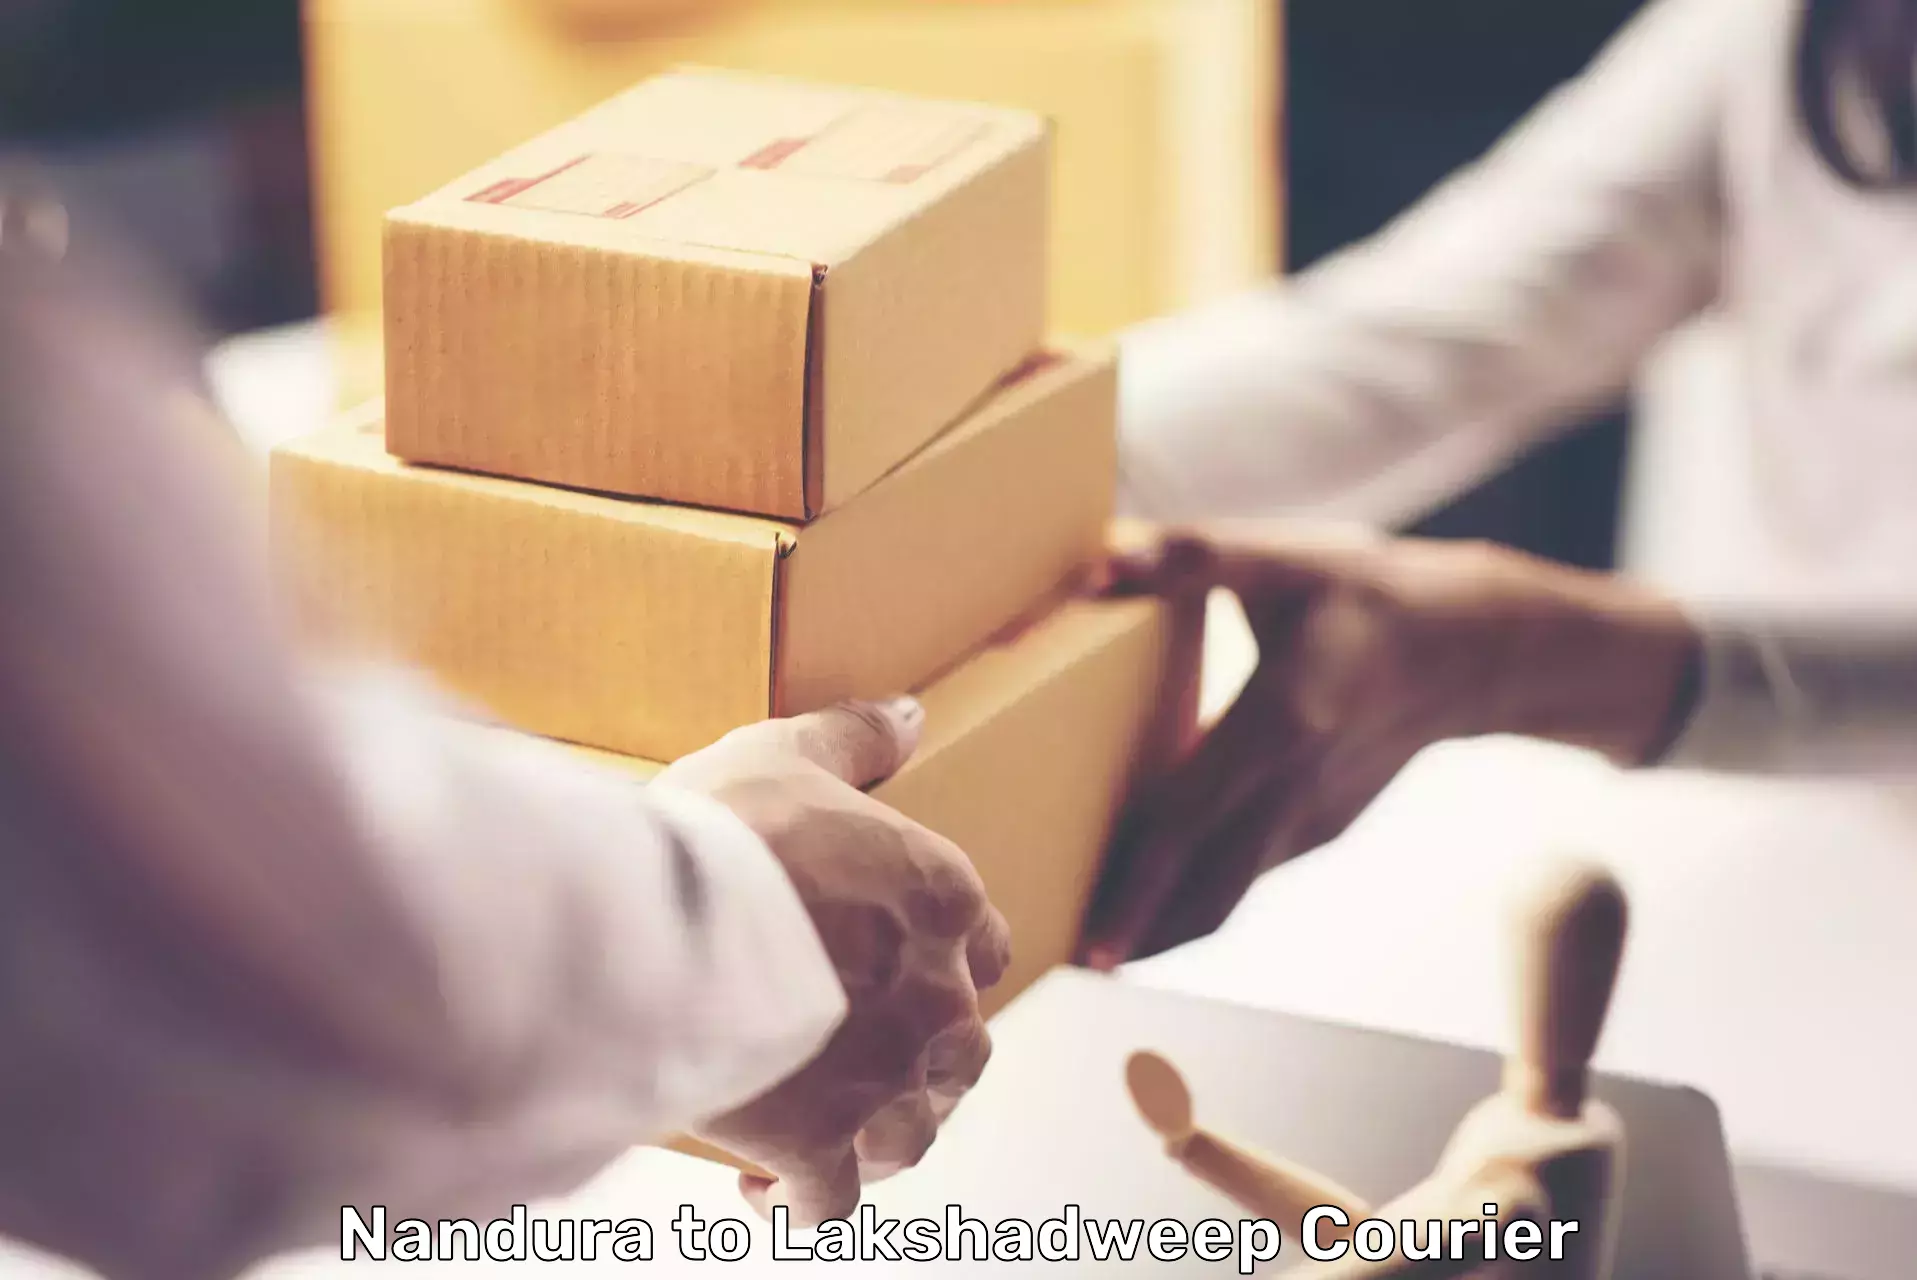 Efficient courier operations in Nandura to Lakshadweep